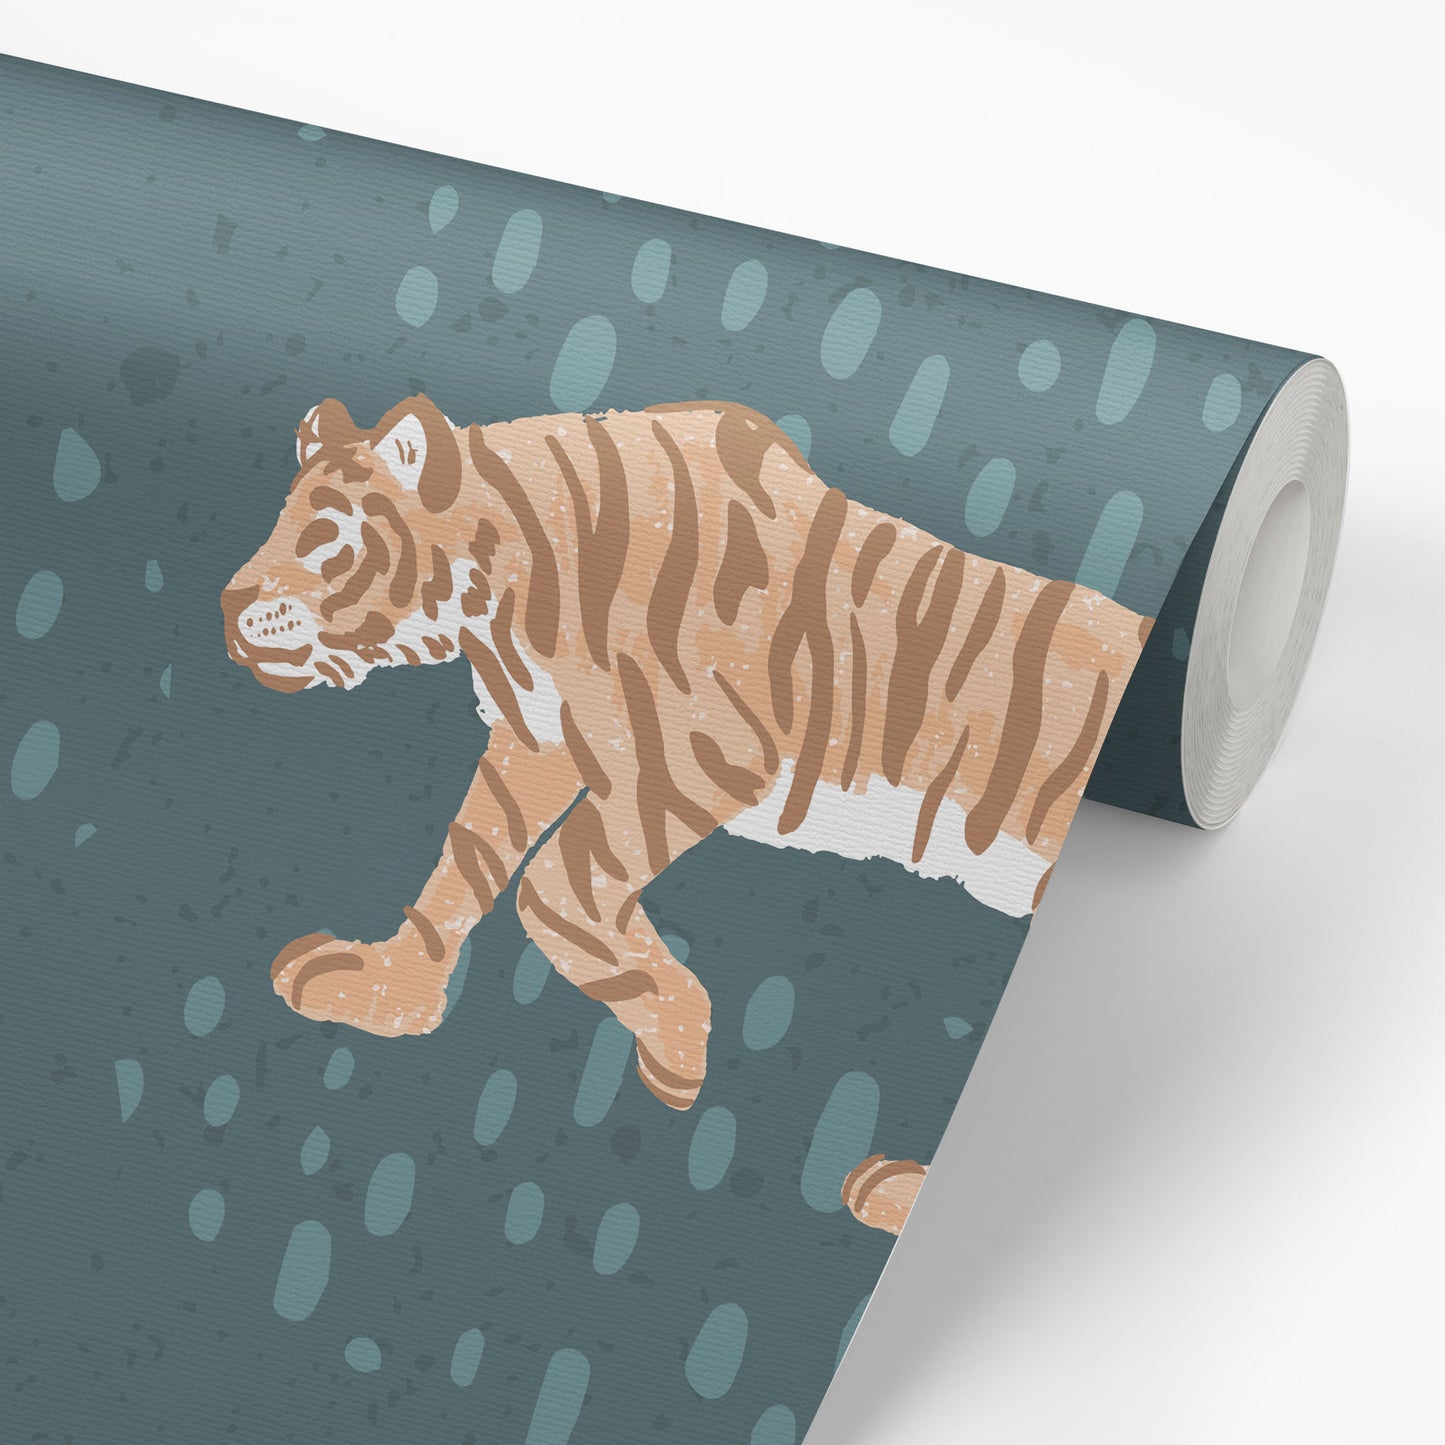 Wallpaper Roll of Tiger Meadow- Dark Blue Wallpaper perfect for a nursery or playroom space.